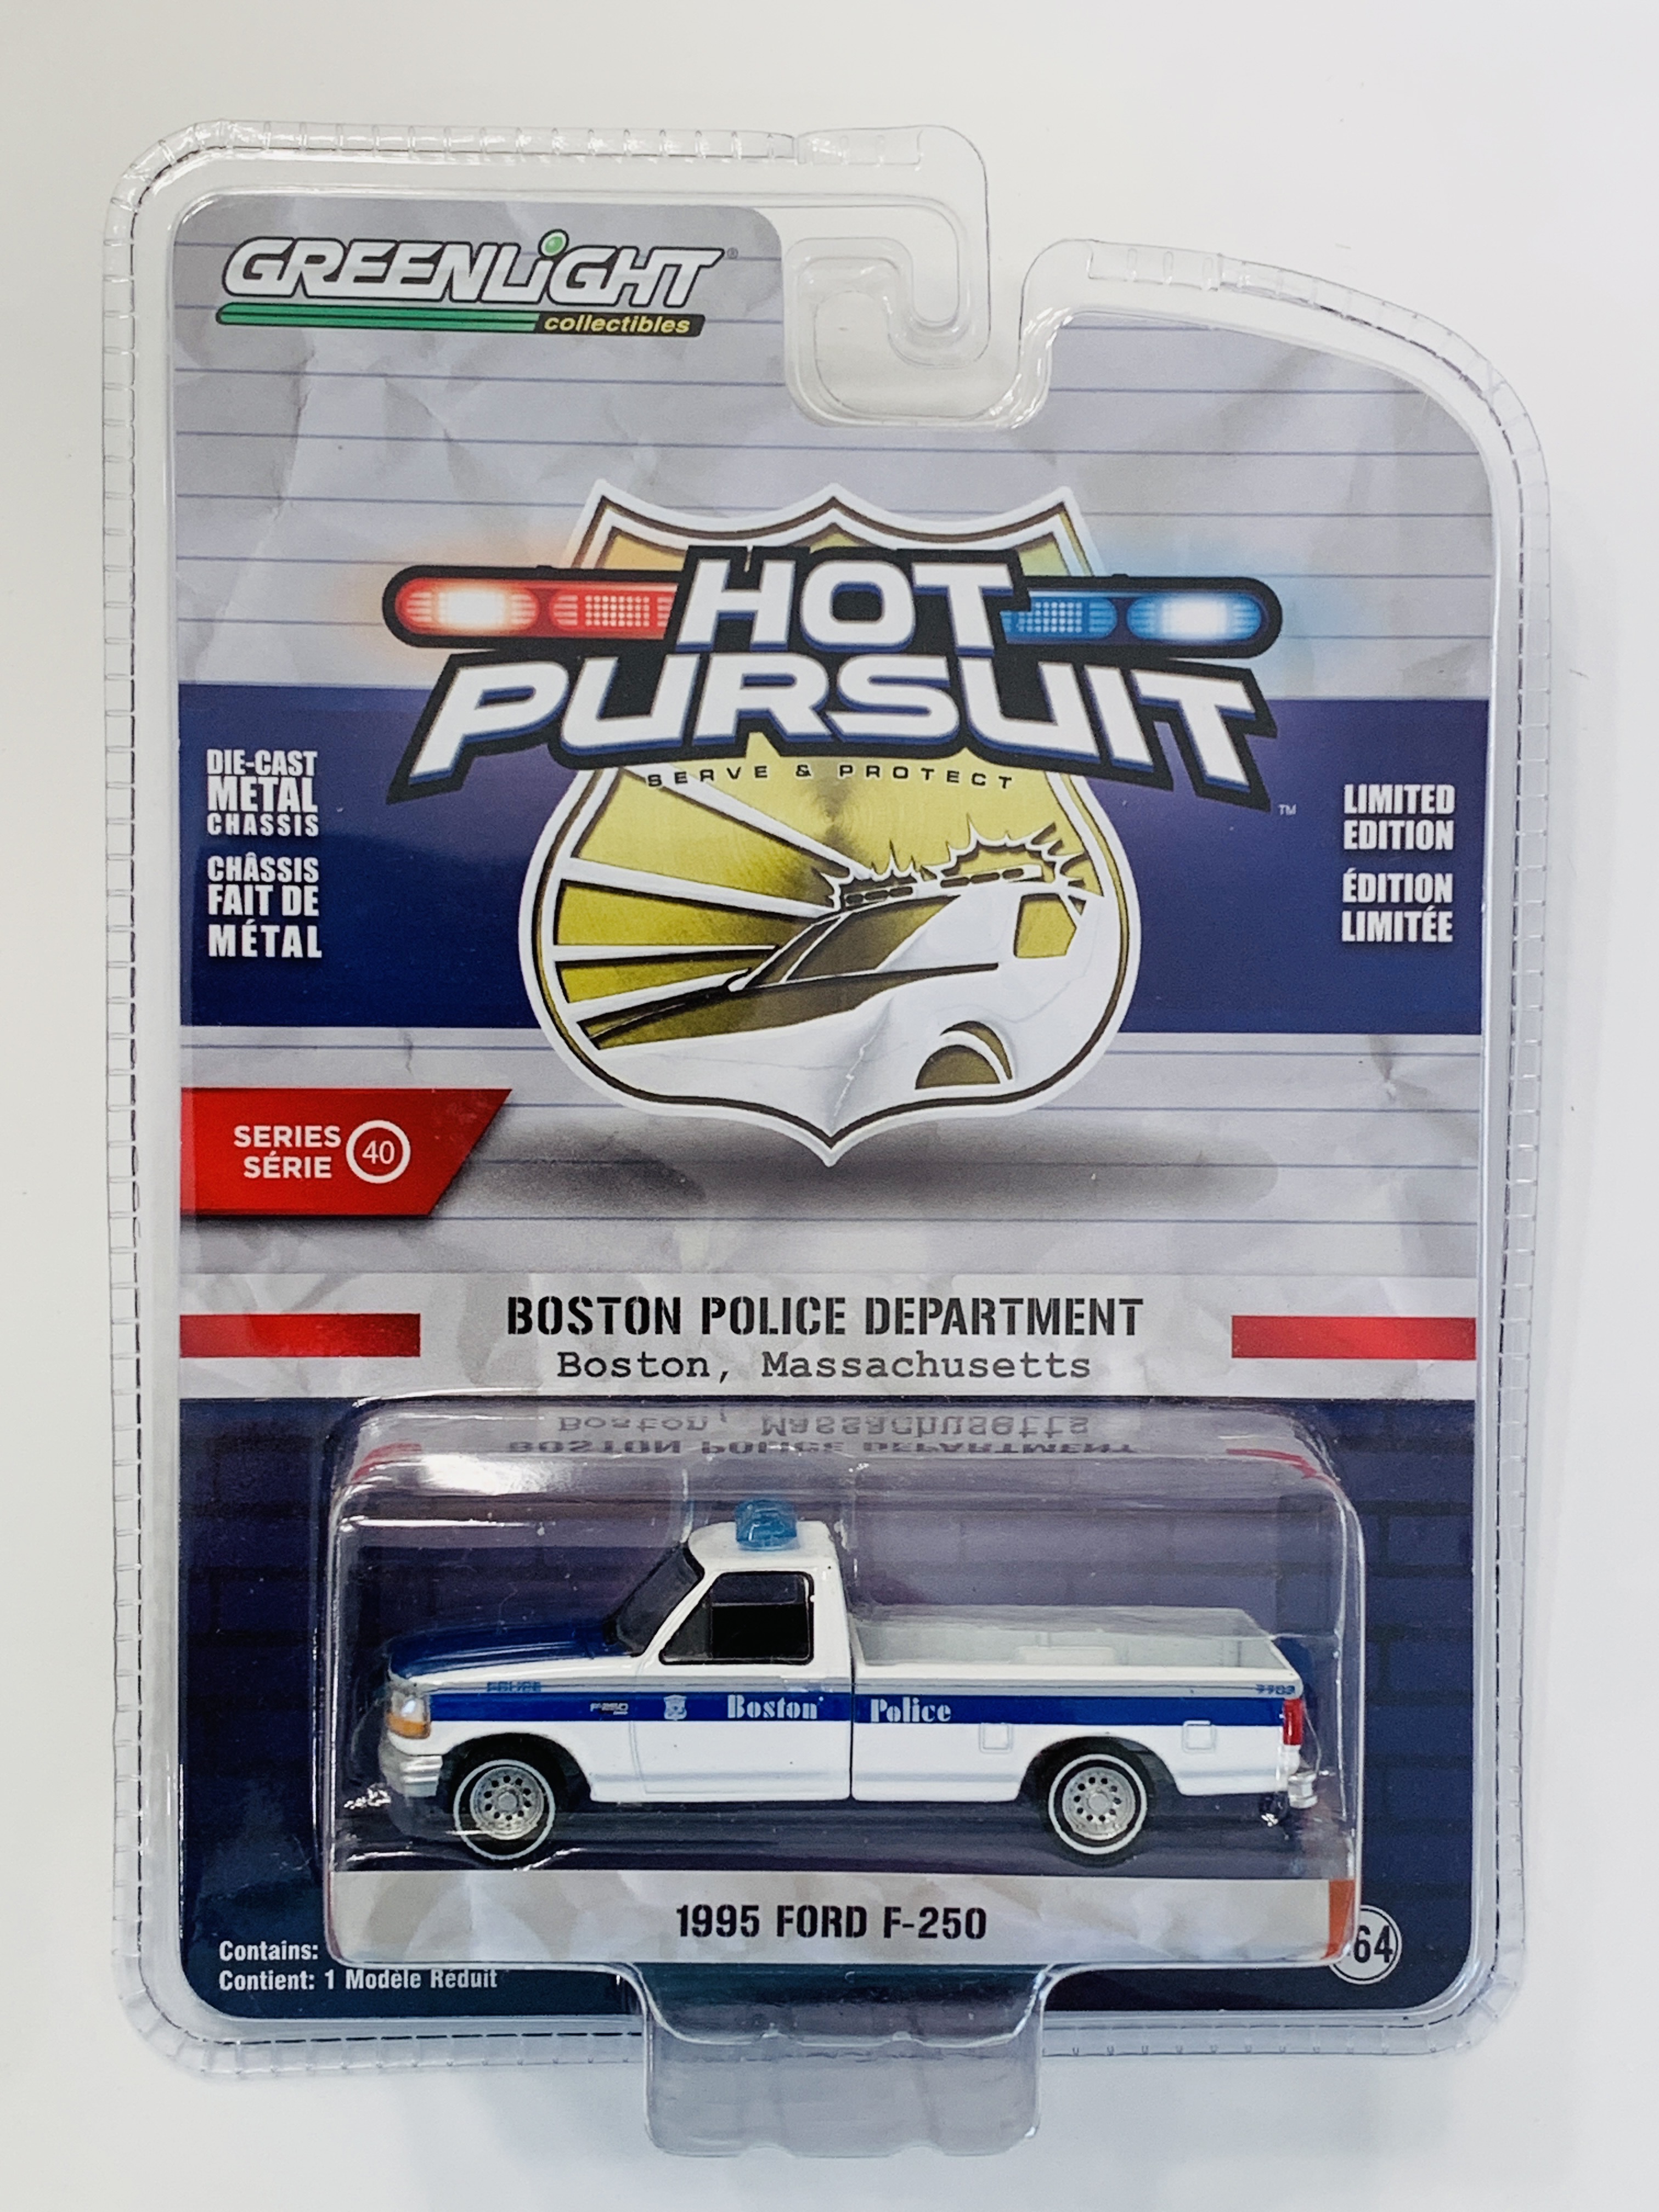 Greenlight Hot Pursuit Boston Police Department 1995 Ford F-250